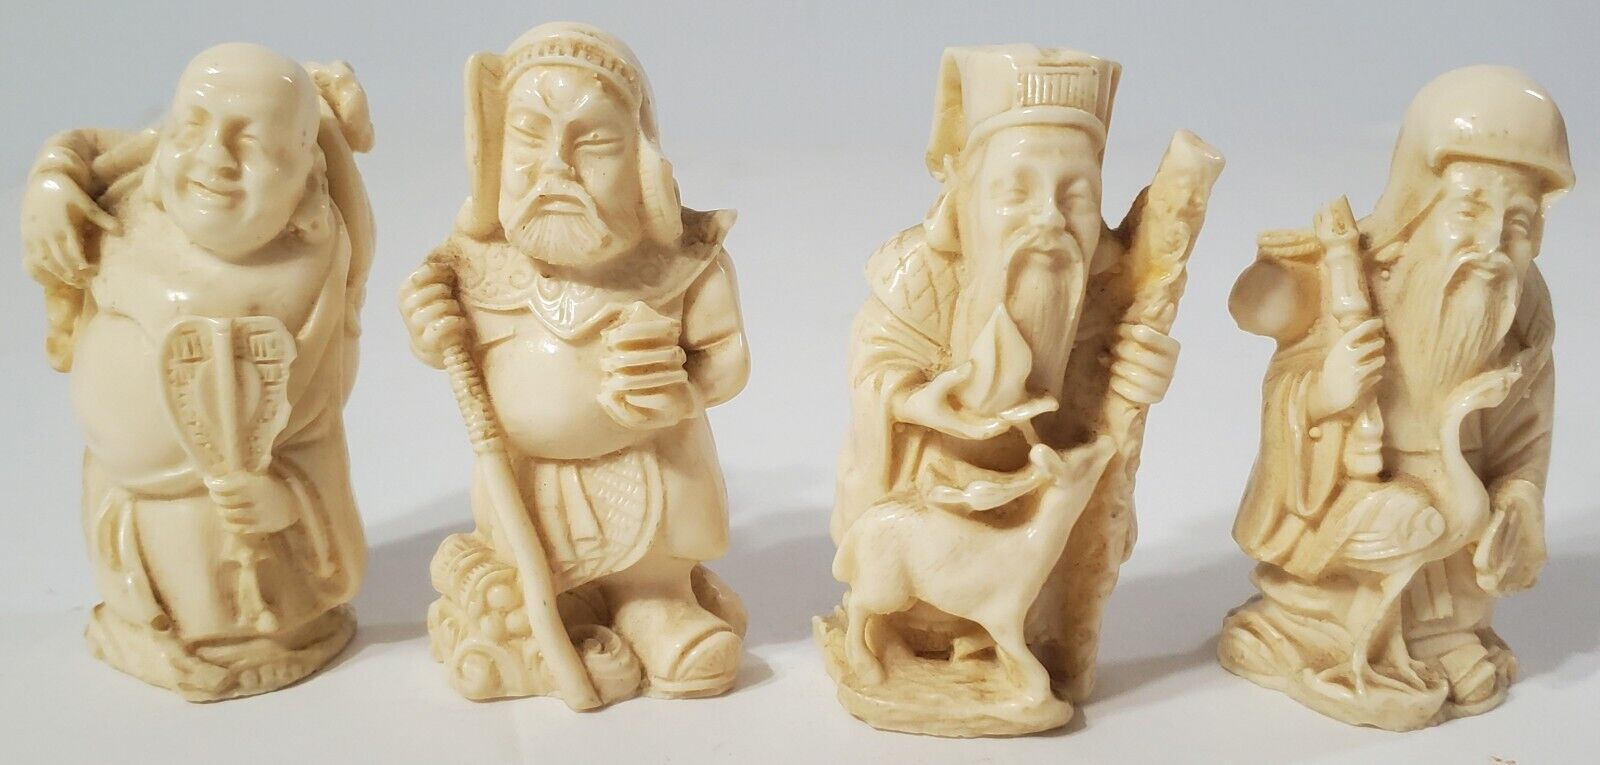 Vintage Chinese Wisemen Figurines; Longlife, Happiness, Wealth &Peace Nice